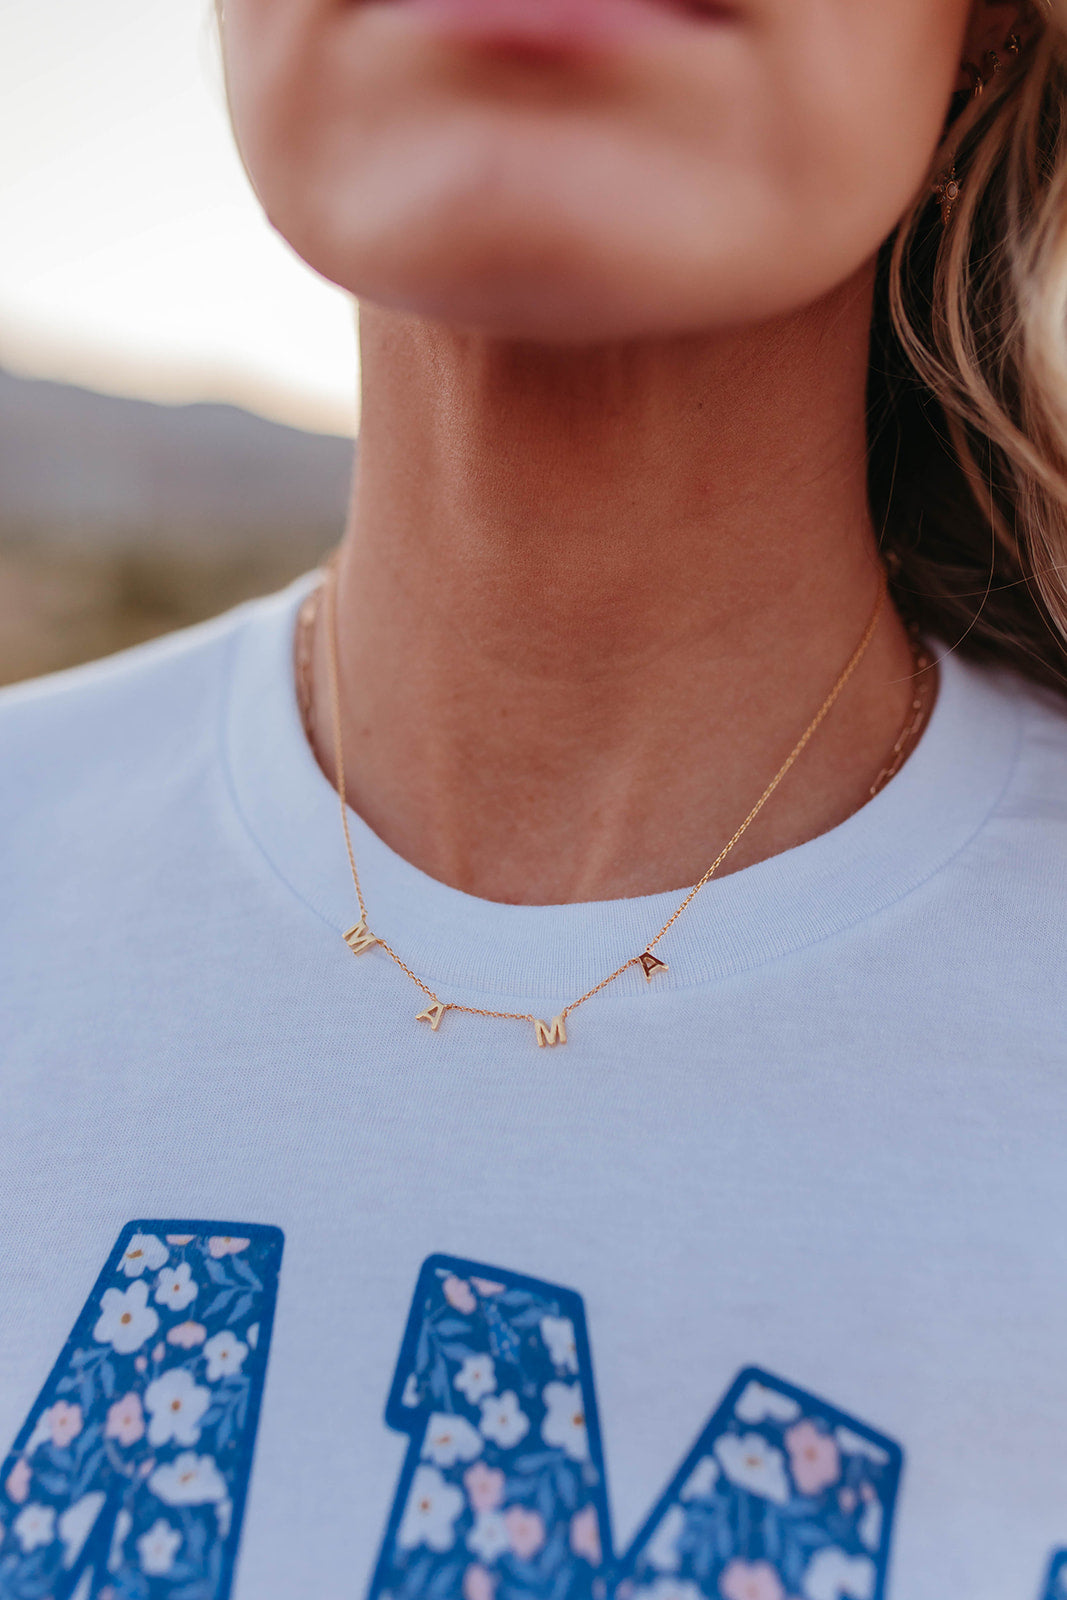 THE MAMA CHARM NECKLACE IN GOLD